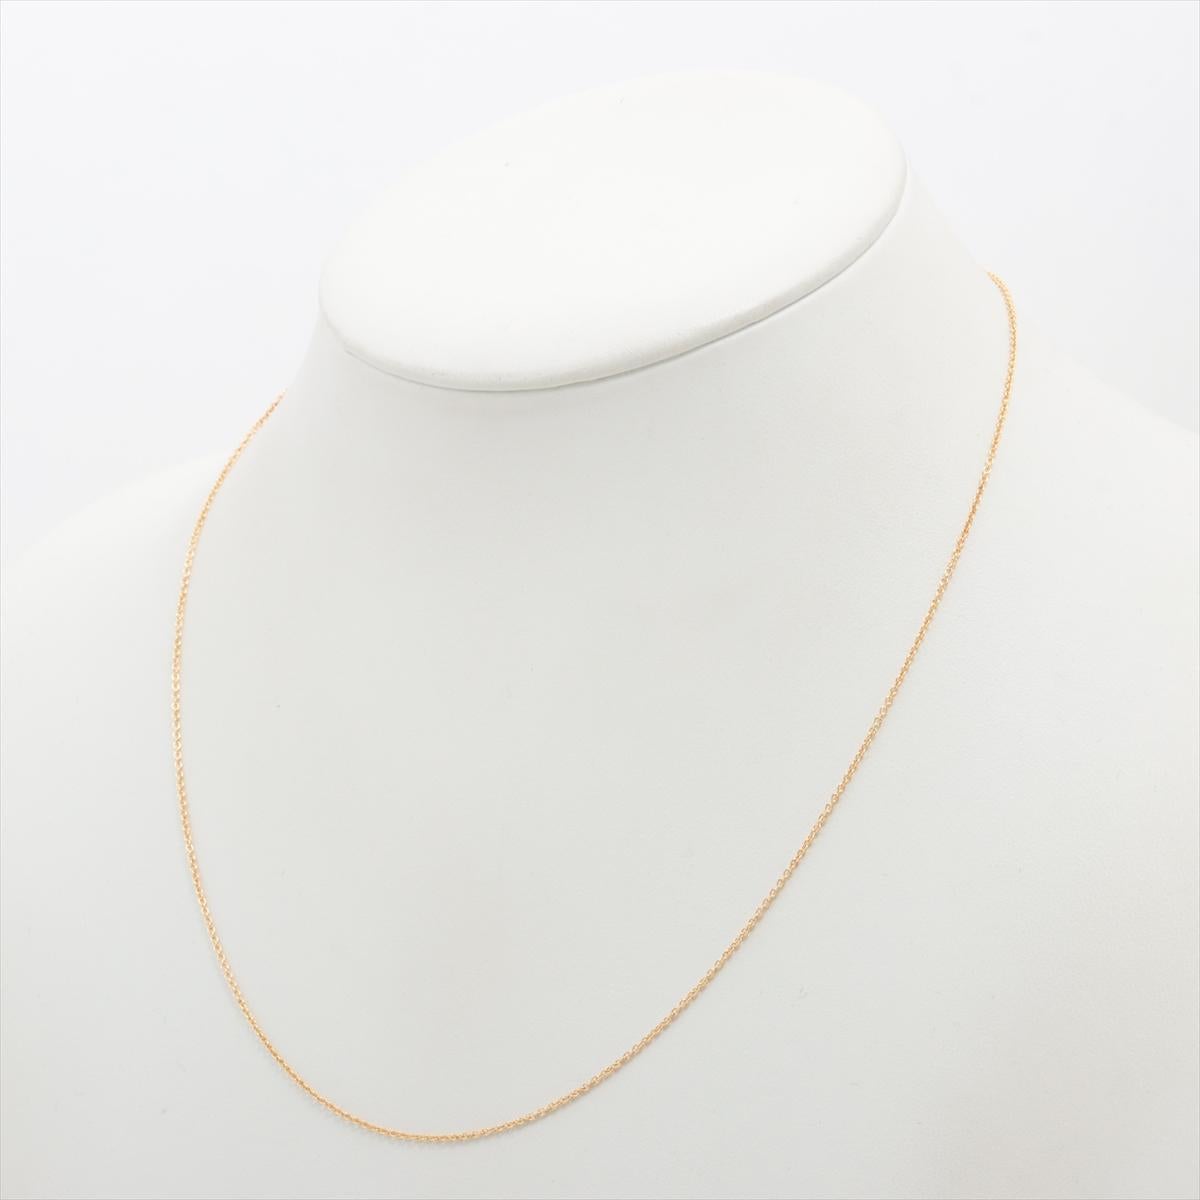 The Tiffany & Co. Rolo Link Chain Necklace in Gold is a true embodiment of timeless elegance and sophistication. The necklace features a classic rolo link chain, known for its durability and versatility. The links are carefully designed to interlock